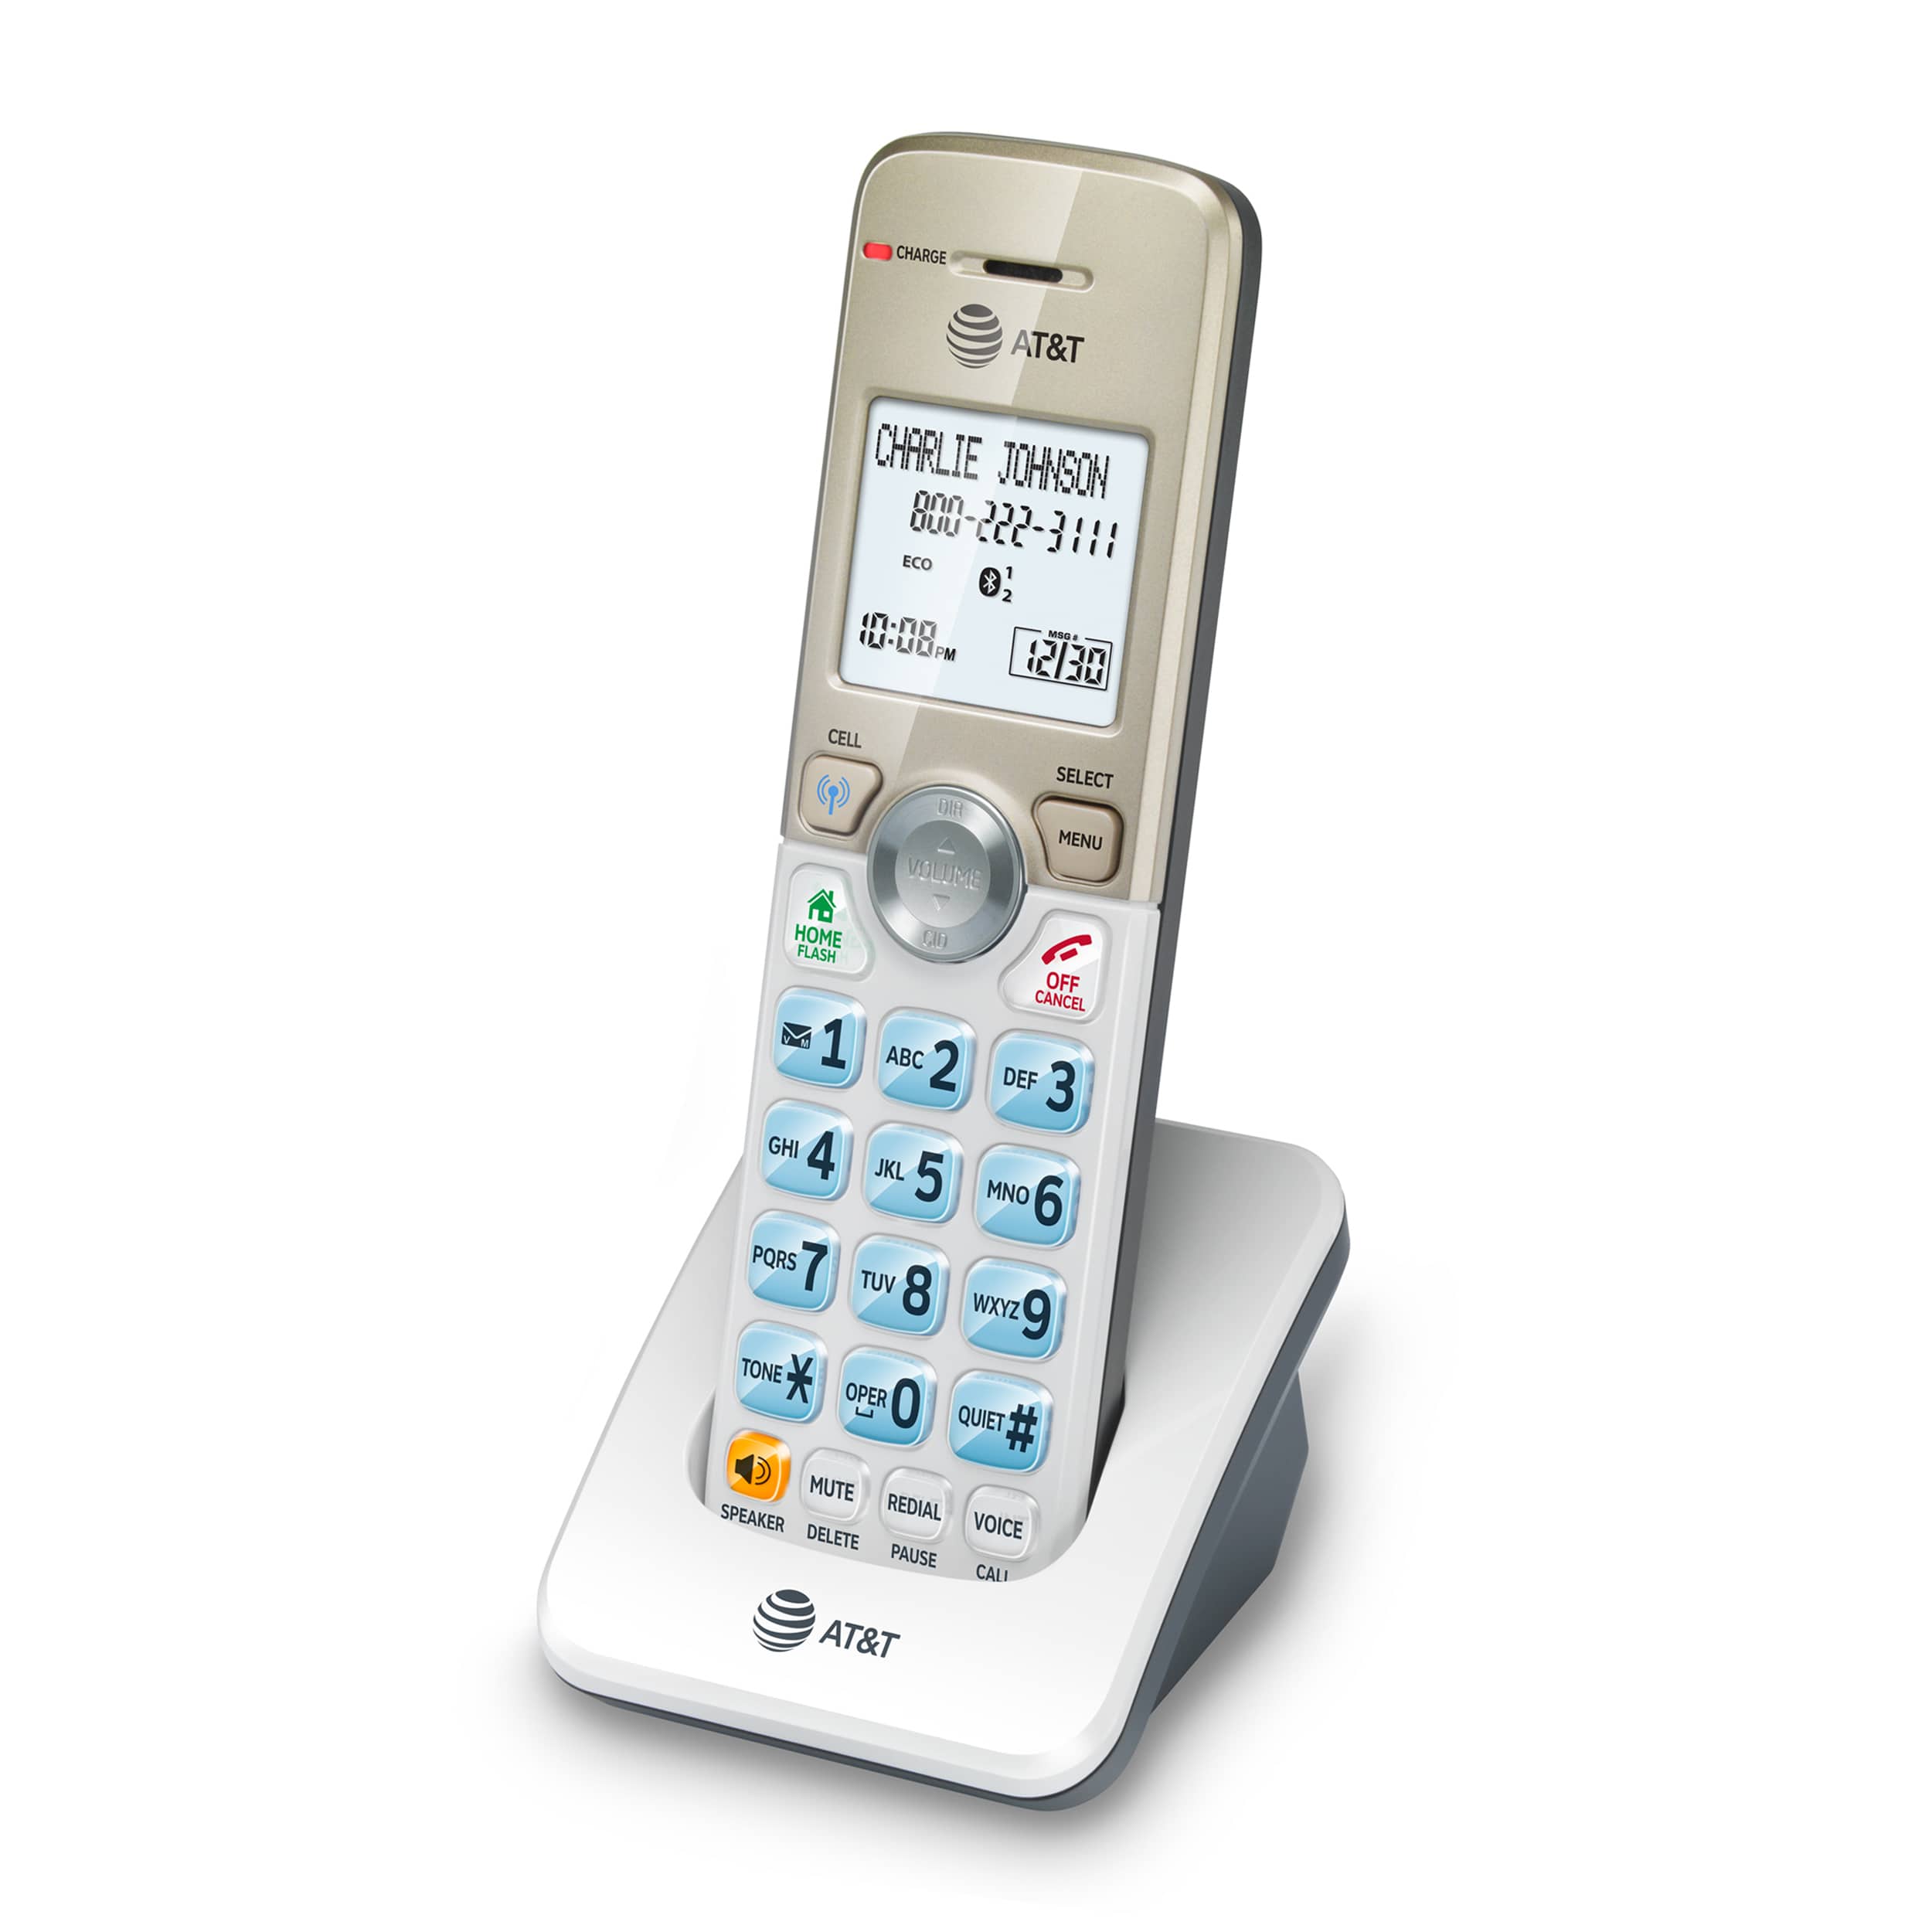 Accessory handset with caller ID/call waiting - view 1